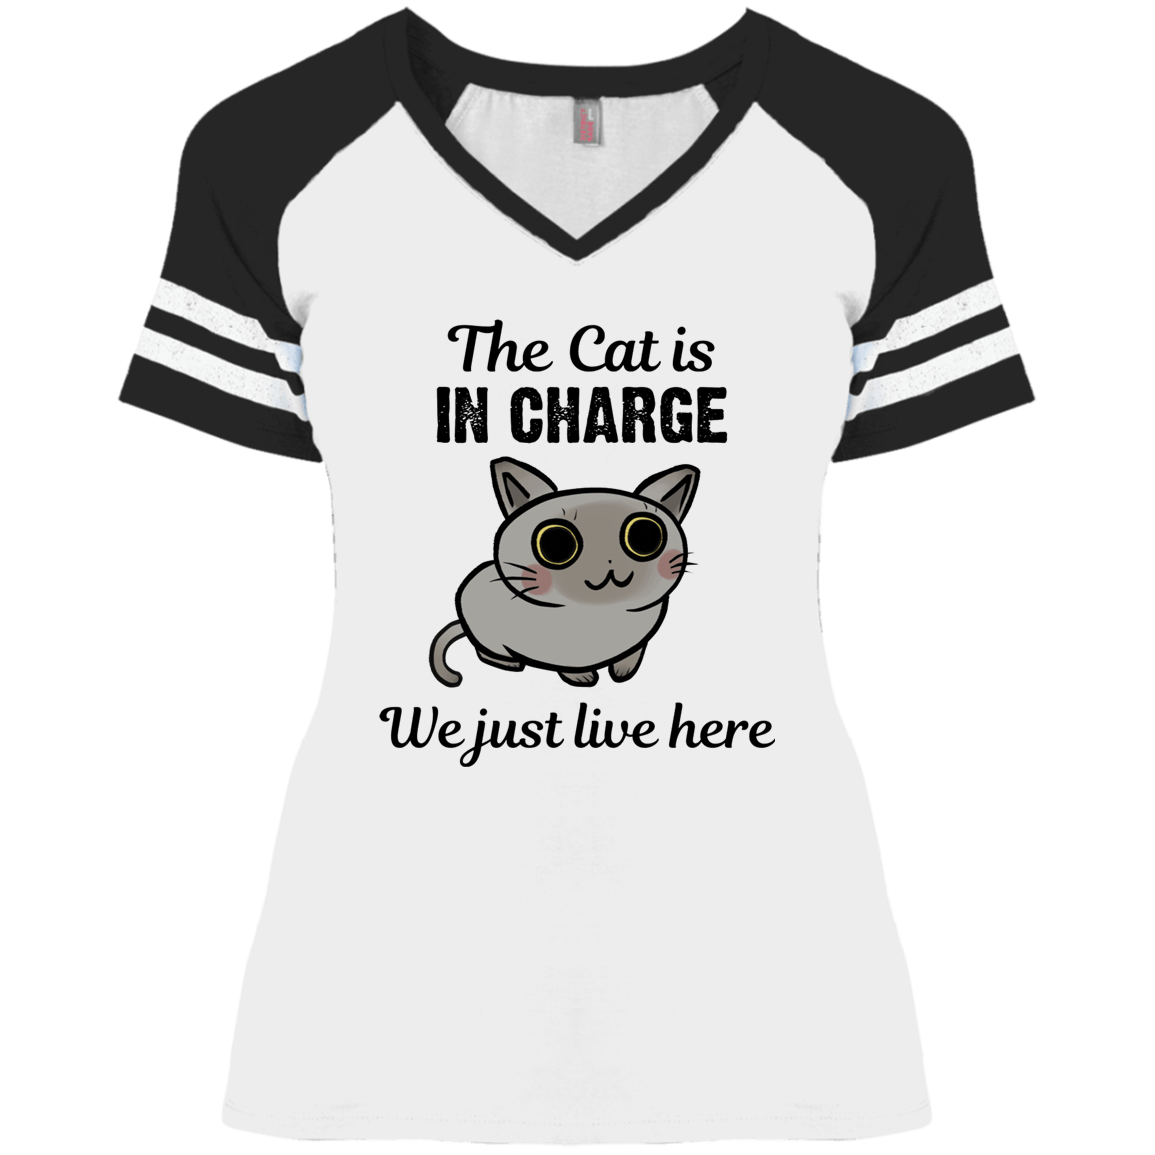 The Cat is in Charge - Ladies Varsity V-Neck.